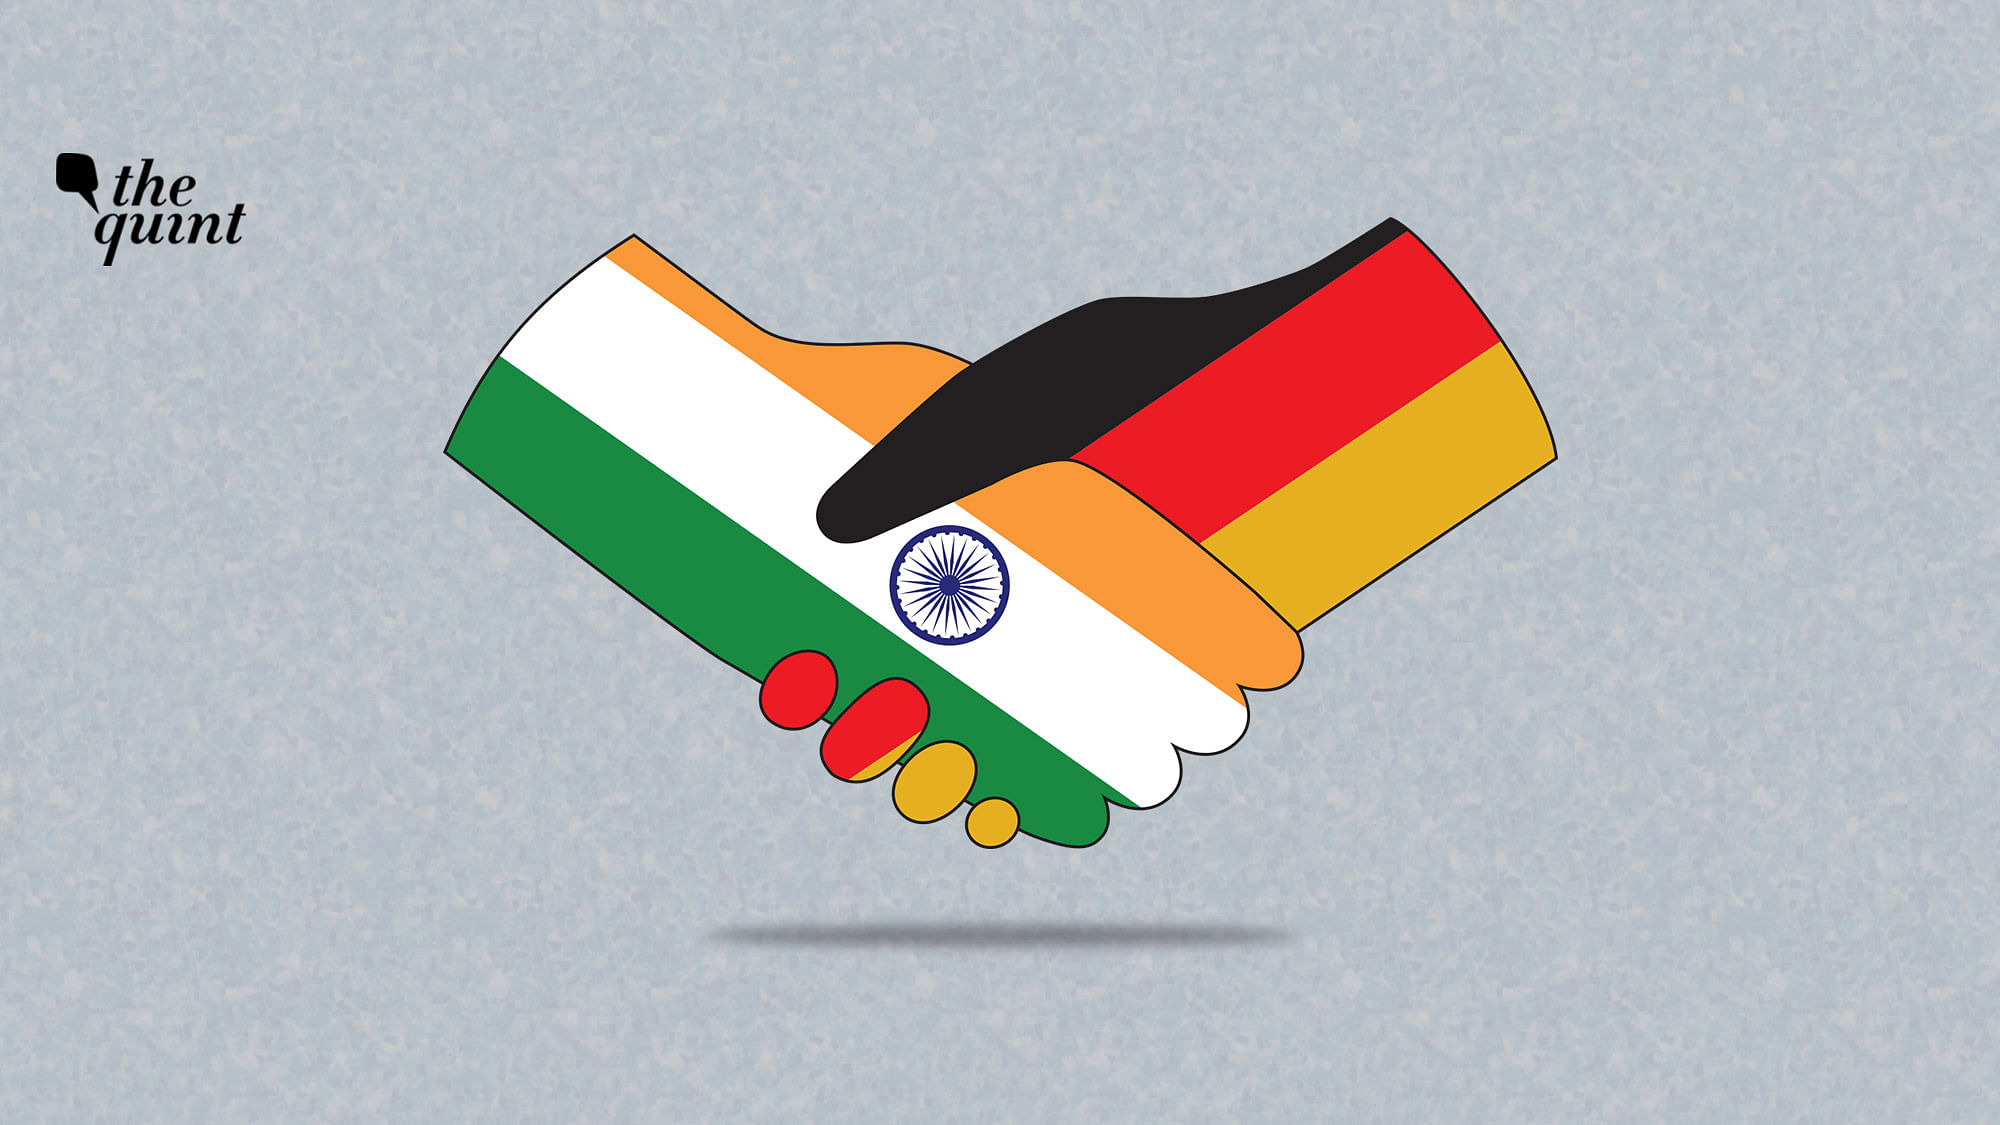 Image of Indian and German flags used for representational purposes